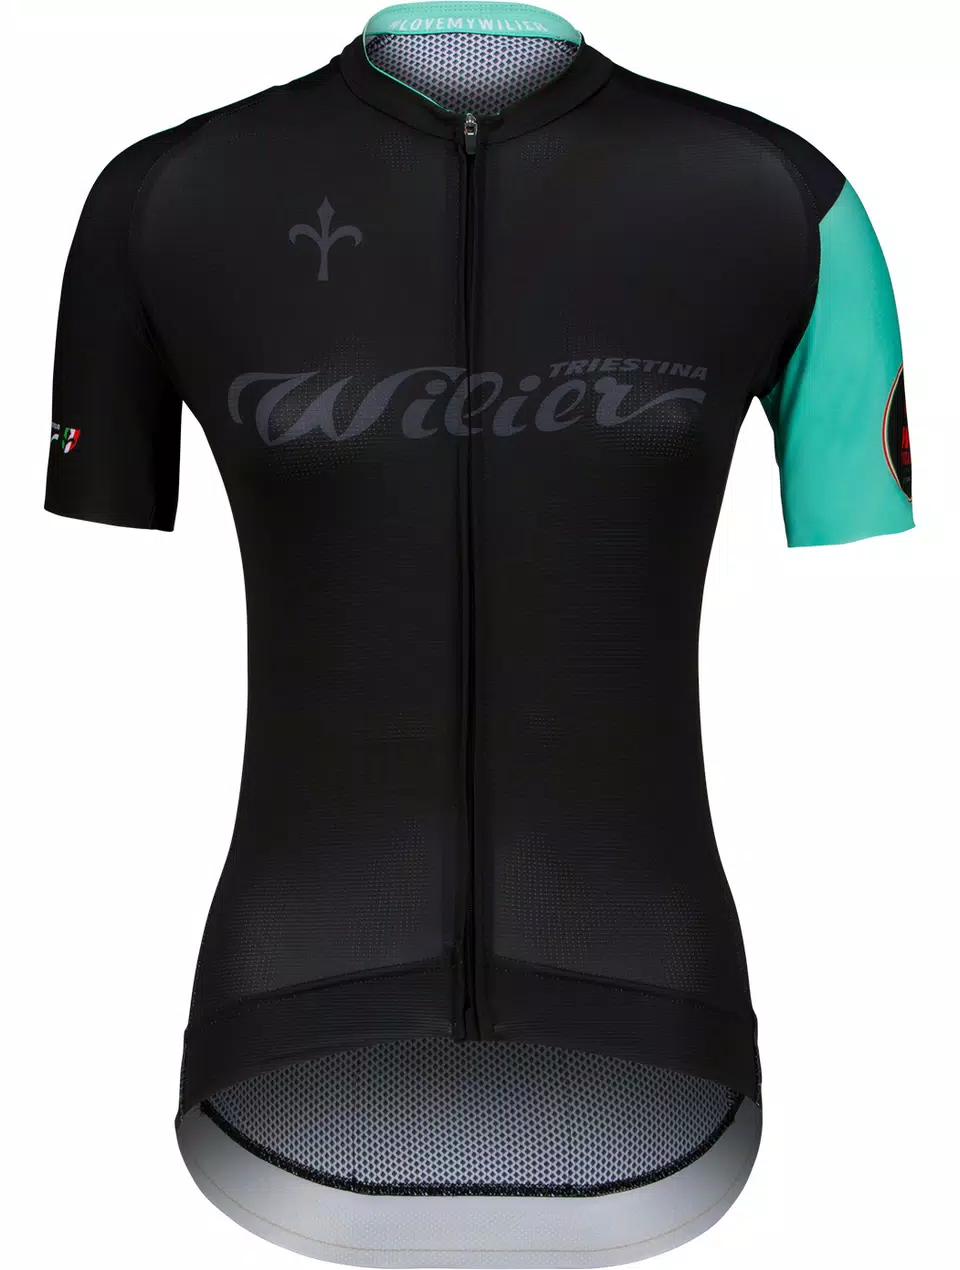 Maglia donna Wilier Cycling Club nera